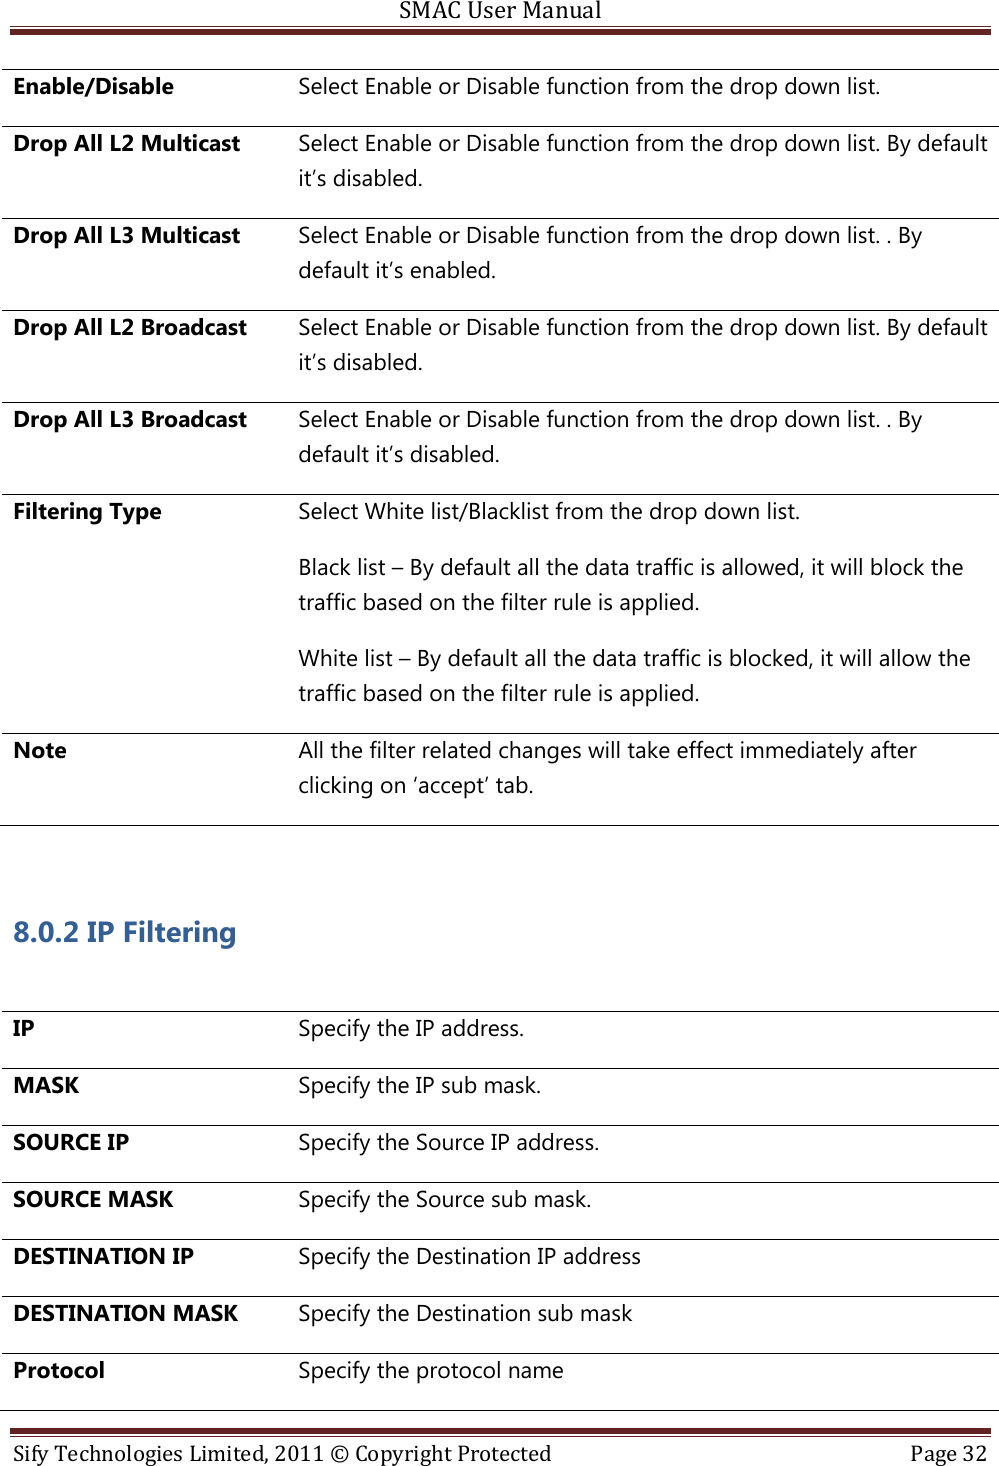 SMAC User Manual  Sify Technologies Limited, 2011 © Copyright Protected  Page 32  Enable/Disable Select Enable or Disable function from the drop down list. Drop All L2 Multicast Select Enable or Disable function from the drop down list. By default it’s disabled. Drop All L3 Multicast Select Enable or Disable function from the drop down list. . By default it’s enabled. Drop All L2 Broadcast Select Enable or Disable function from the drop down list. By default it’s disabled. Drop All L3 Broadcast Select Enable or Disable function from the drop down list. . By default it’s disabled. Filtering Type Select White list/Blacklist from the drop down list. Black list – By default all the data traffic is allowed, it will block the traffic based on the filter rule is applied. White list – By default all the data traffic is blocked, it will allow the traffic based on the filter rule is applied. Note All the filter related changes will take effect immediately after clicking on ‘accept’ tab.  8.0.2 IP Filtering   IP Specify the IP address. MASK Specify the IP sub mask. SOURCE IP Specify the Source IP address. SOURCE MASK Specify the Source sub mask. DESTINATION IP Specify the Destination IP address DESTINATION MASK Specify the Destination sub mask Protocol Specify the protocol name 